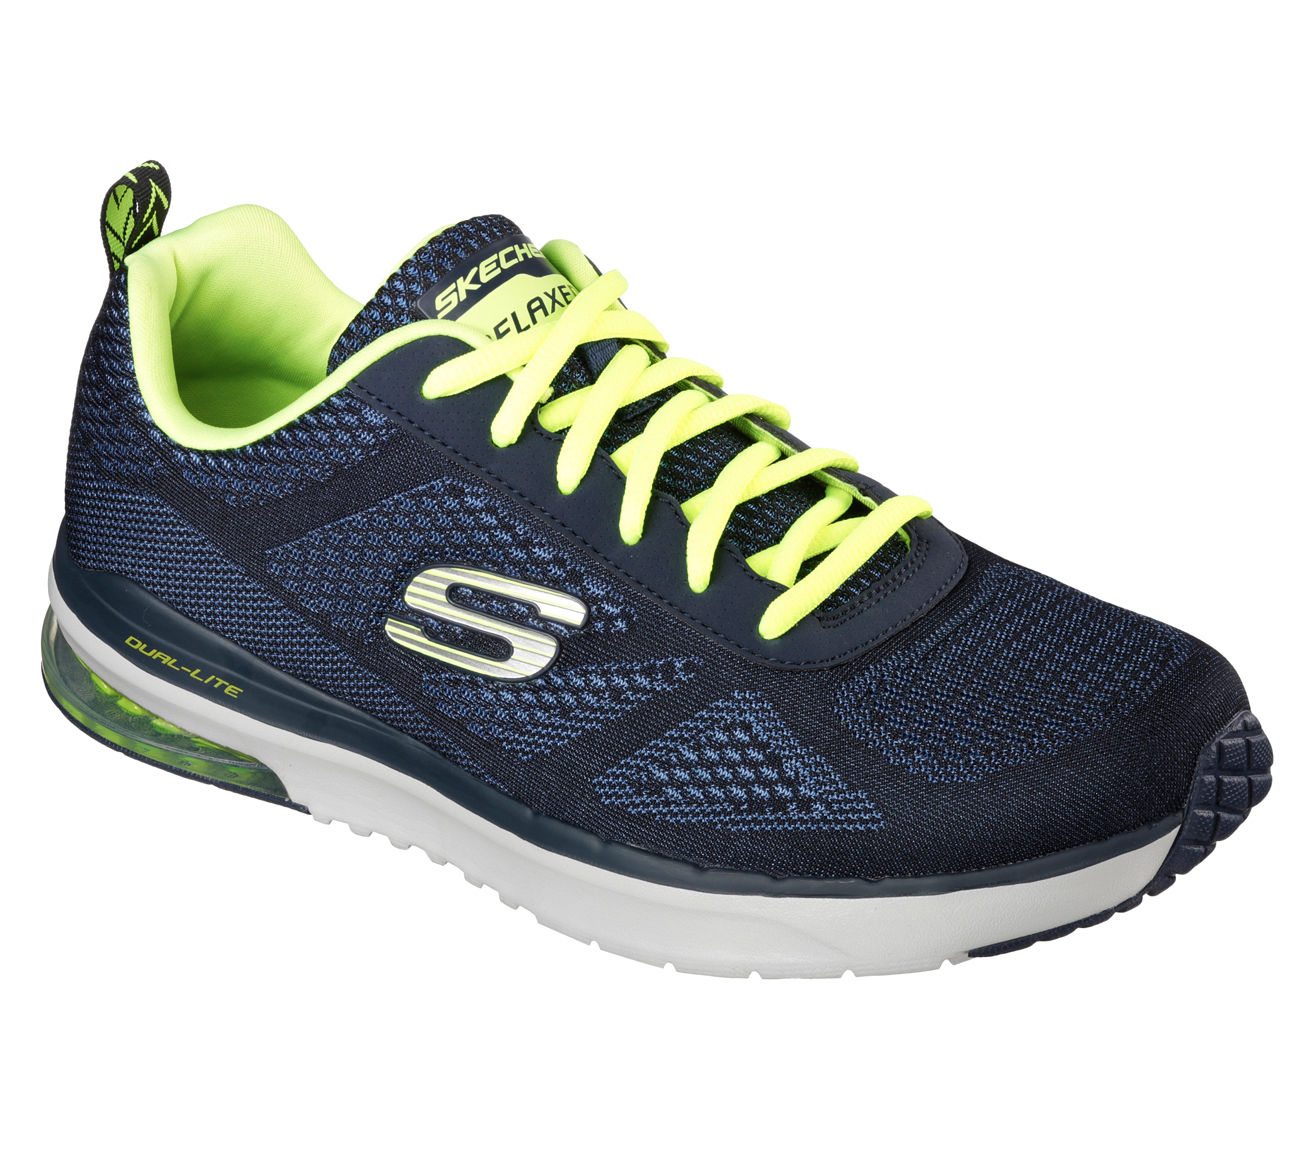 Mens Skechers Skech-Air Infinity Memory Foam Fitness Gym Trainers Sizes ...